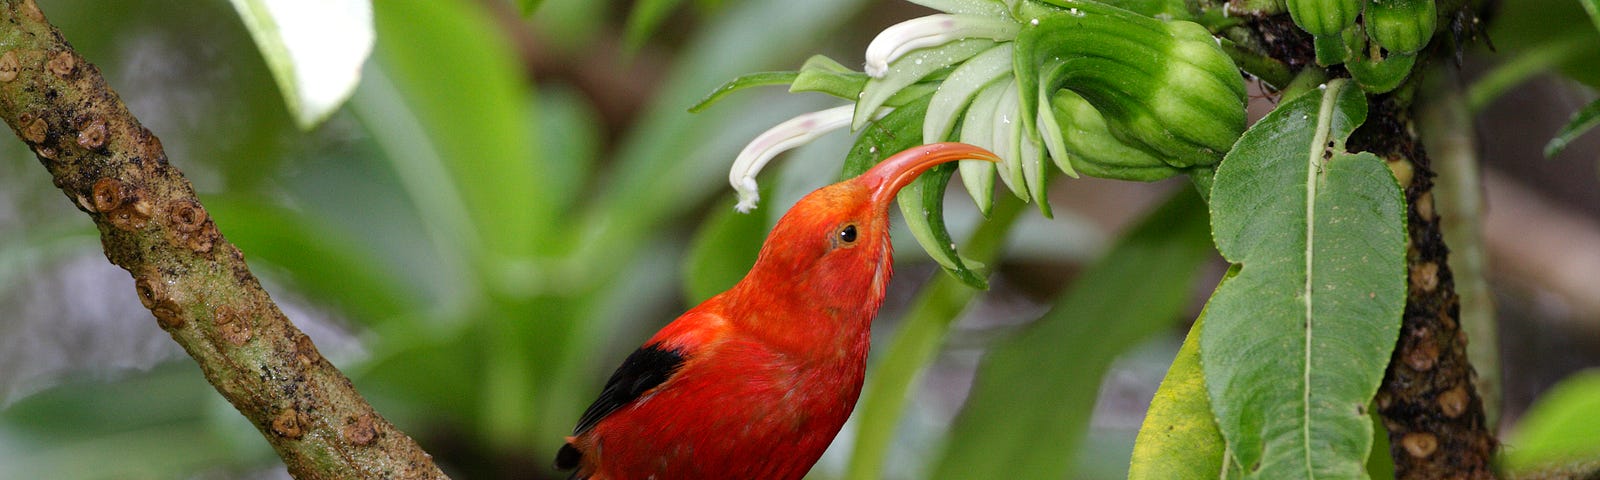 An ʻiʻiwi stands on a branch. It has bright red feathers with black wings. Its long, curved beak is open